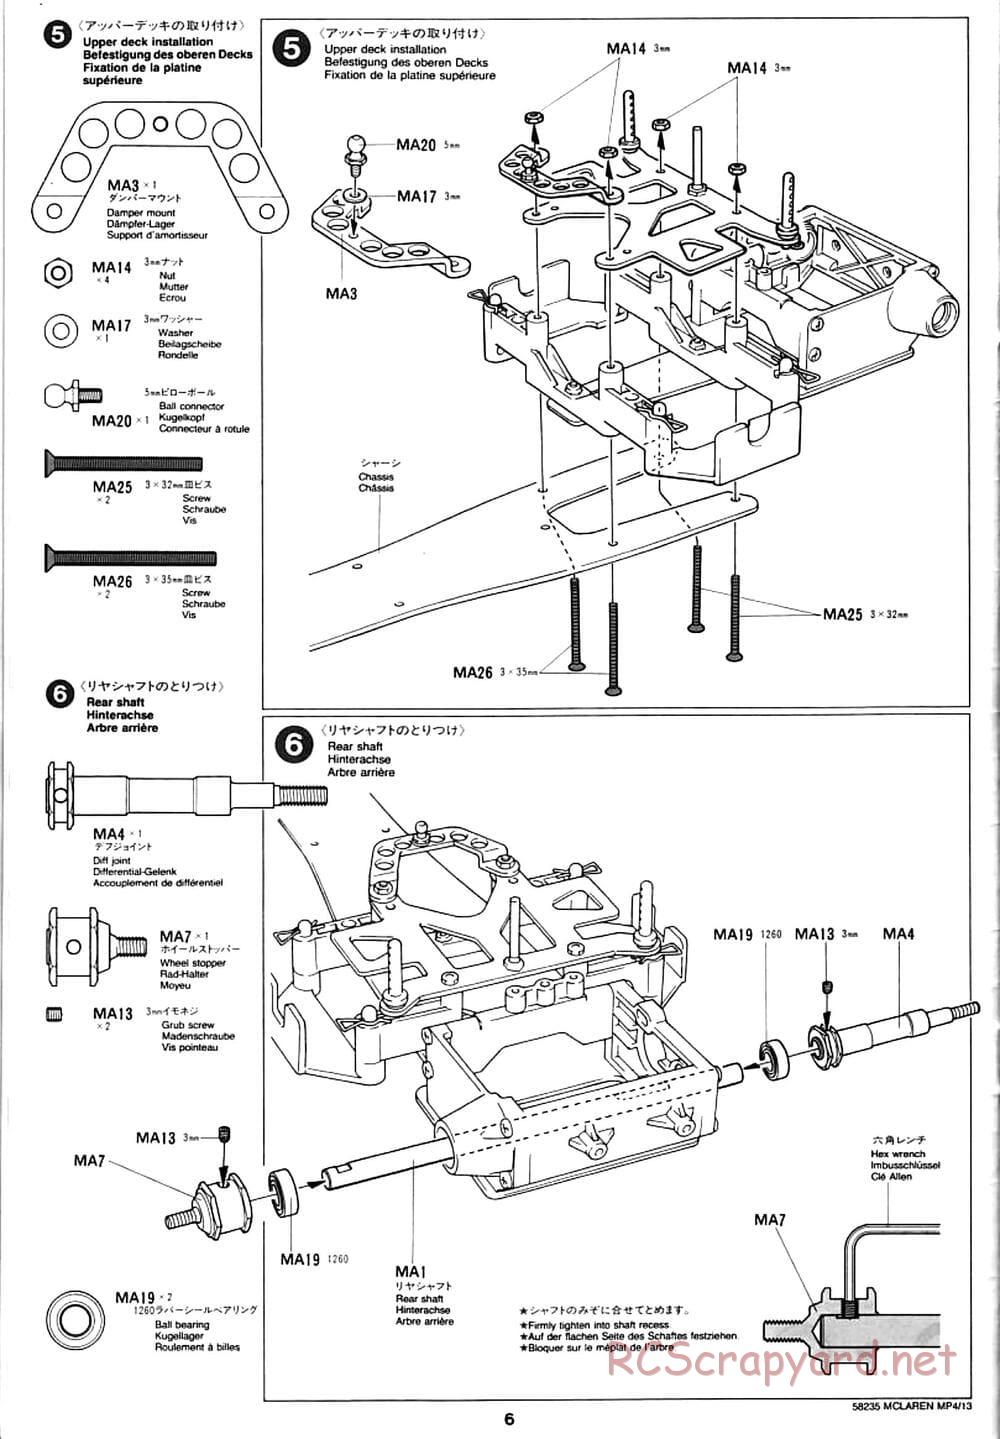 Tamiya - McLaren Mercedes MP4/13 - F103RS Chassis - Manual - Page 6